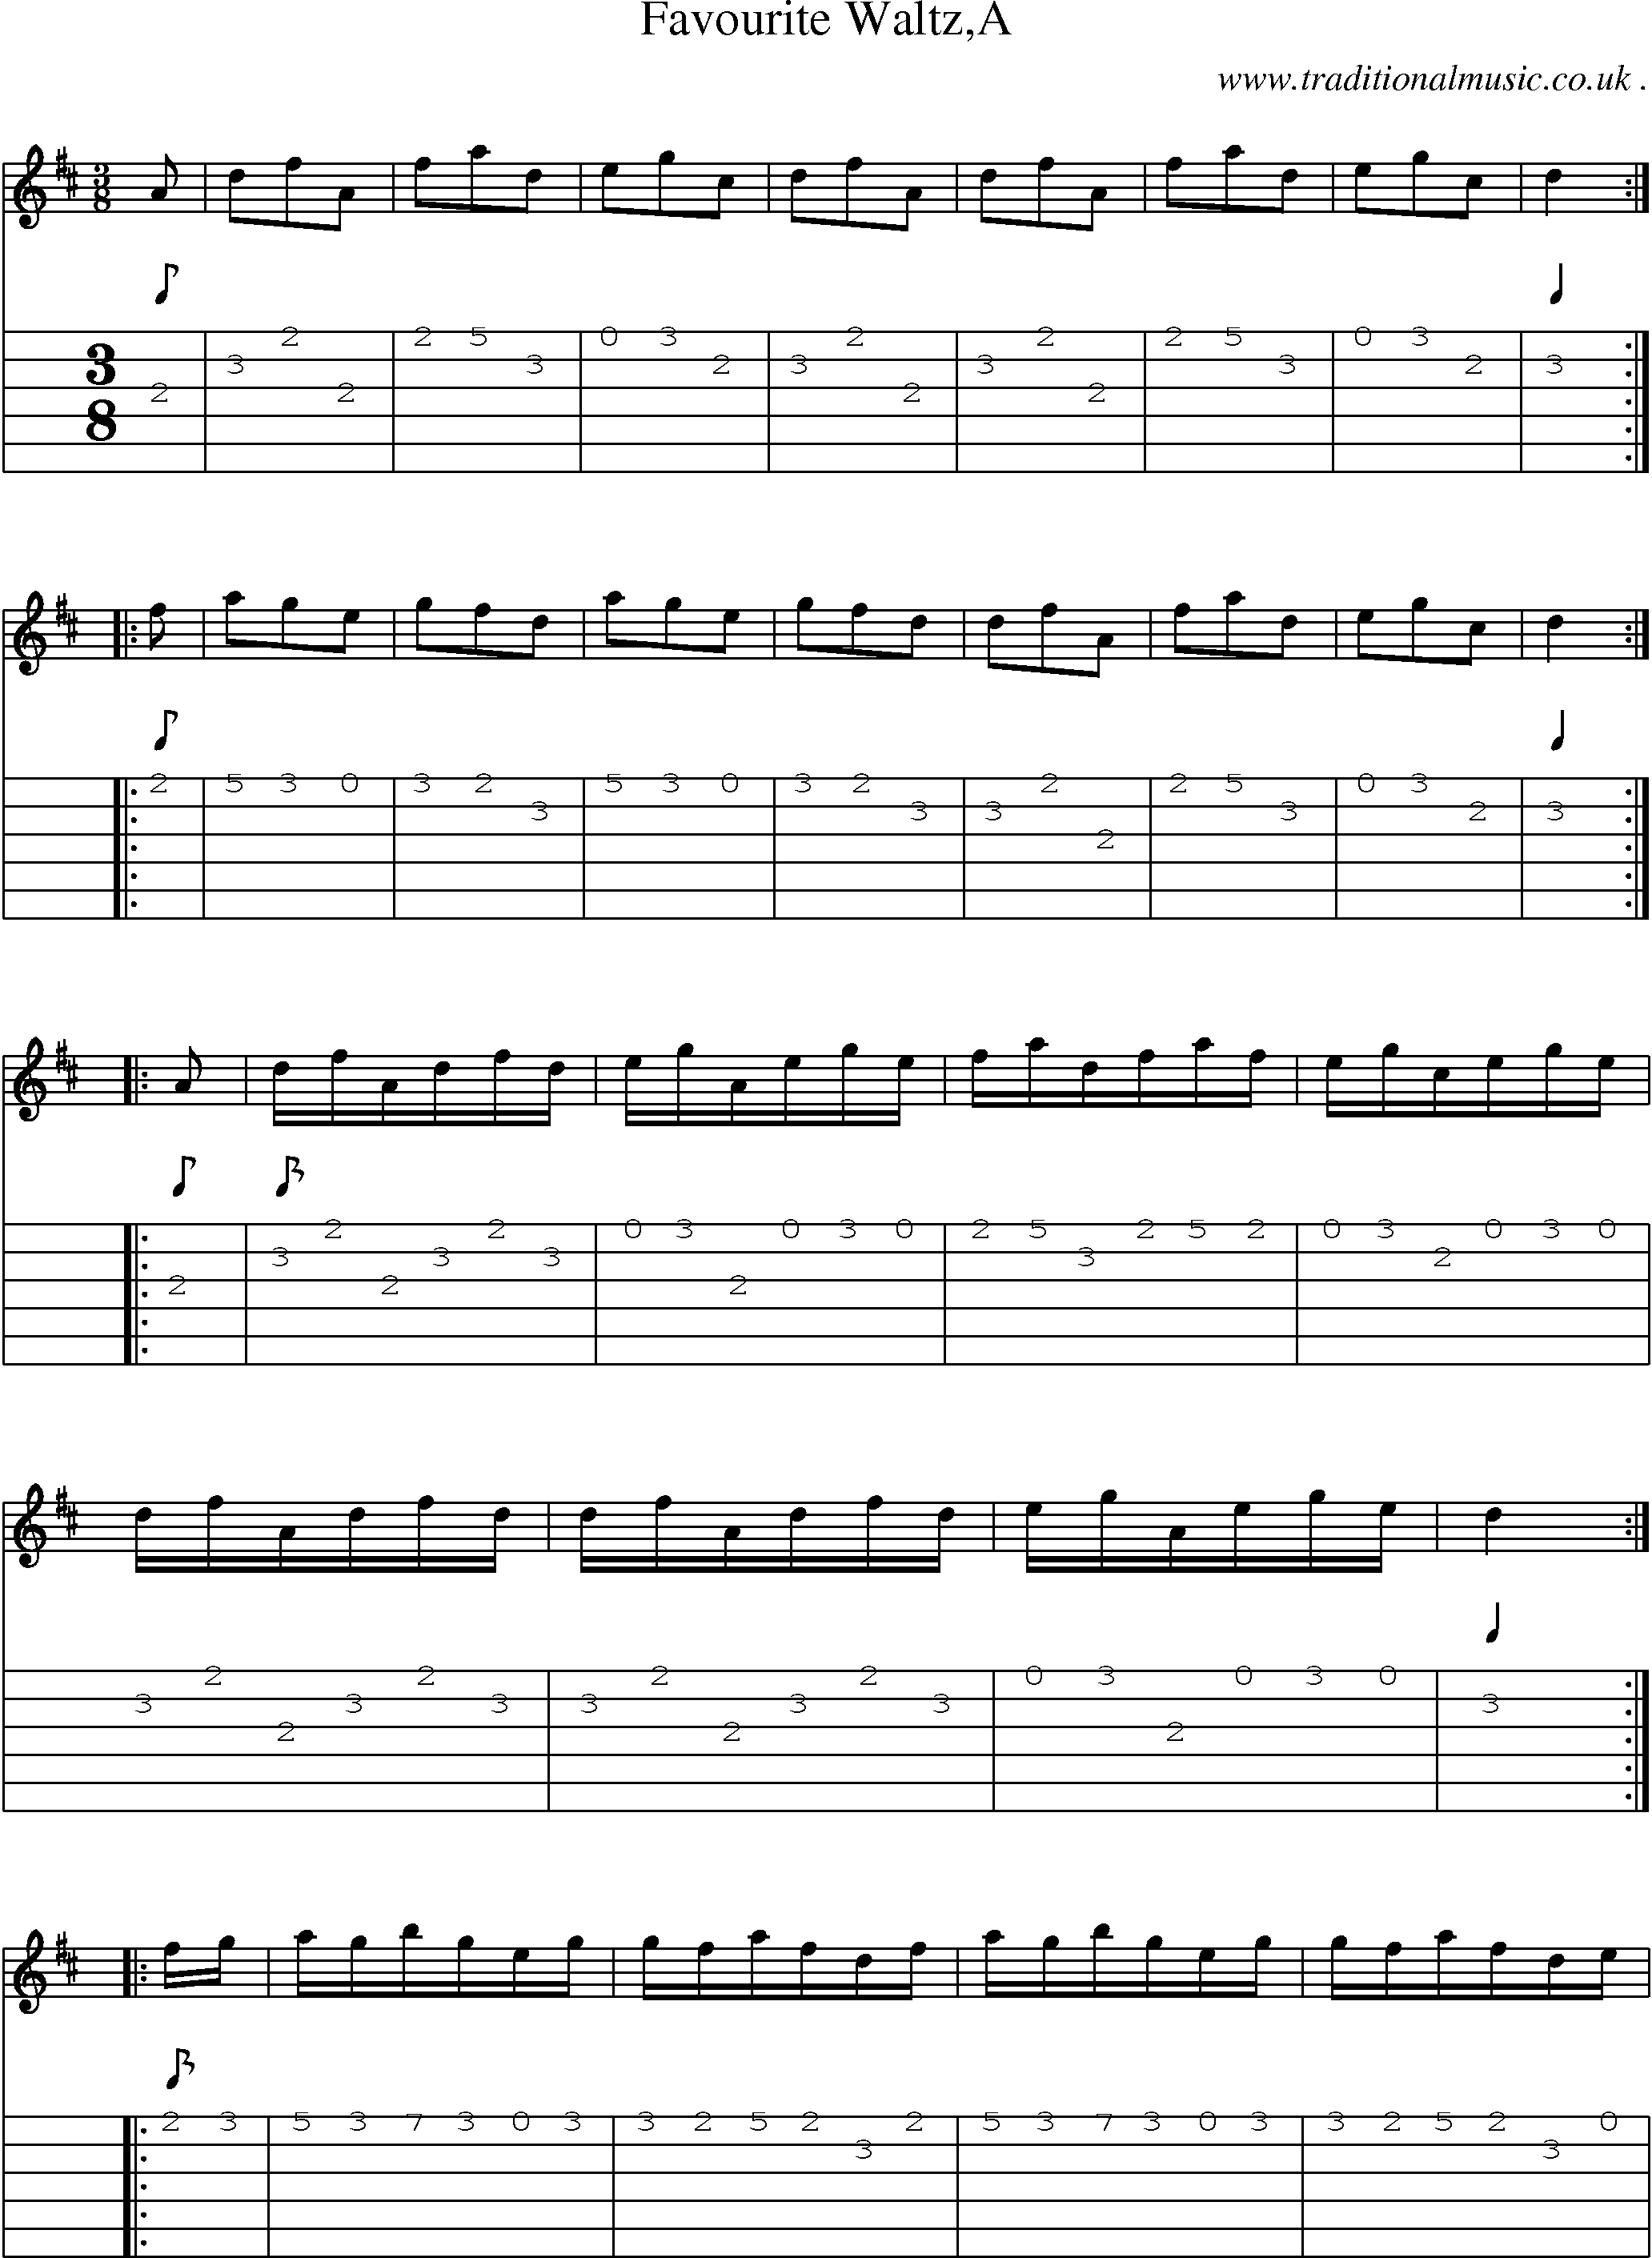 Sheet-Music and Guitar Tabs for Favourite Waltza